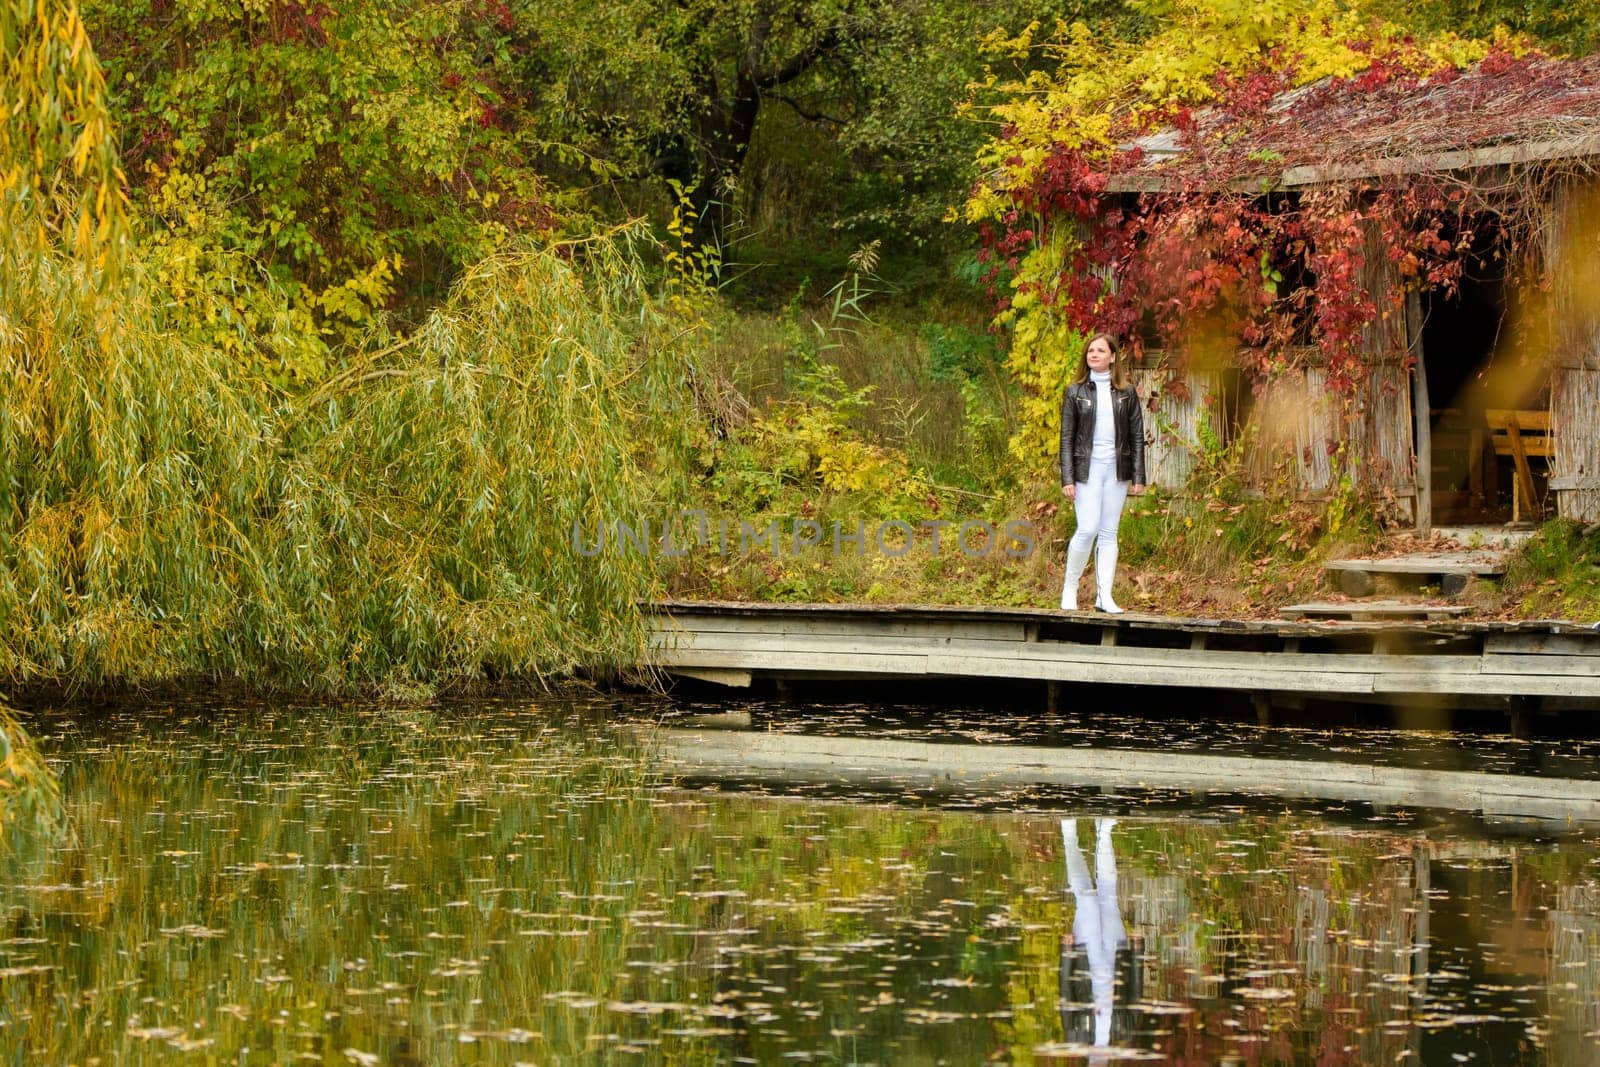 A young beautiful girl walks by the lake in an autumn park a